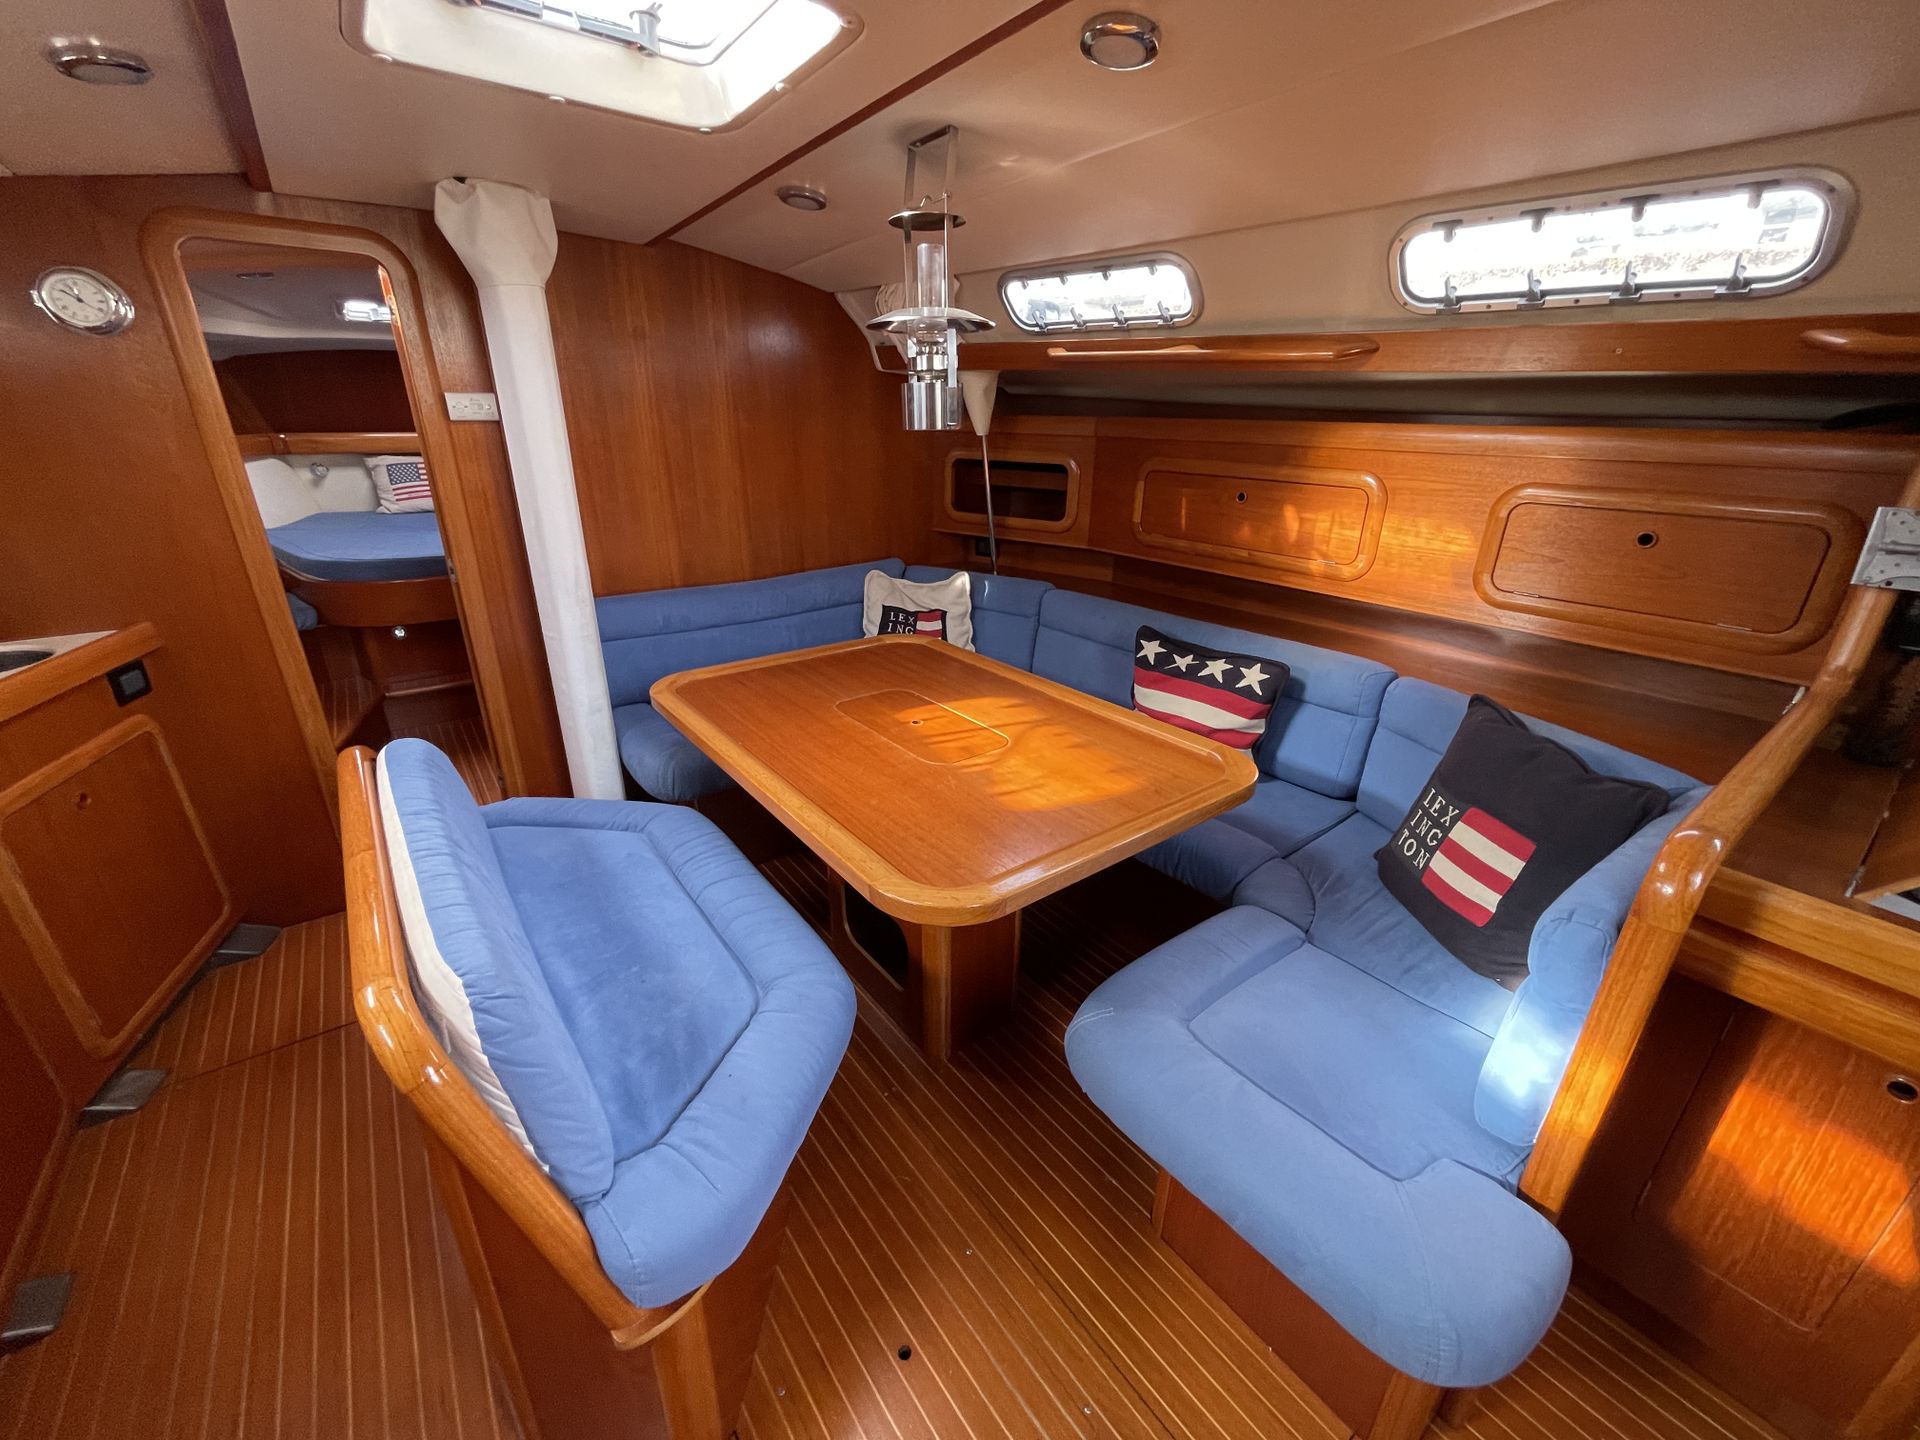 Grand Soleil 46.3 - 3 cabins - 2 owners and renovated teak deck #41